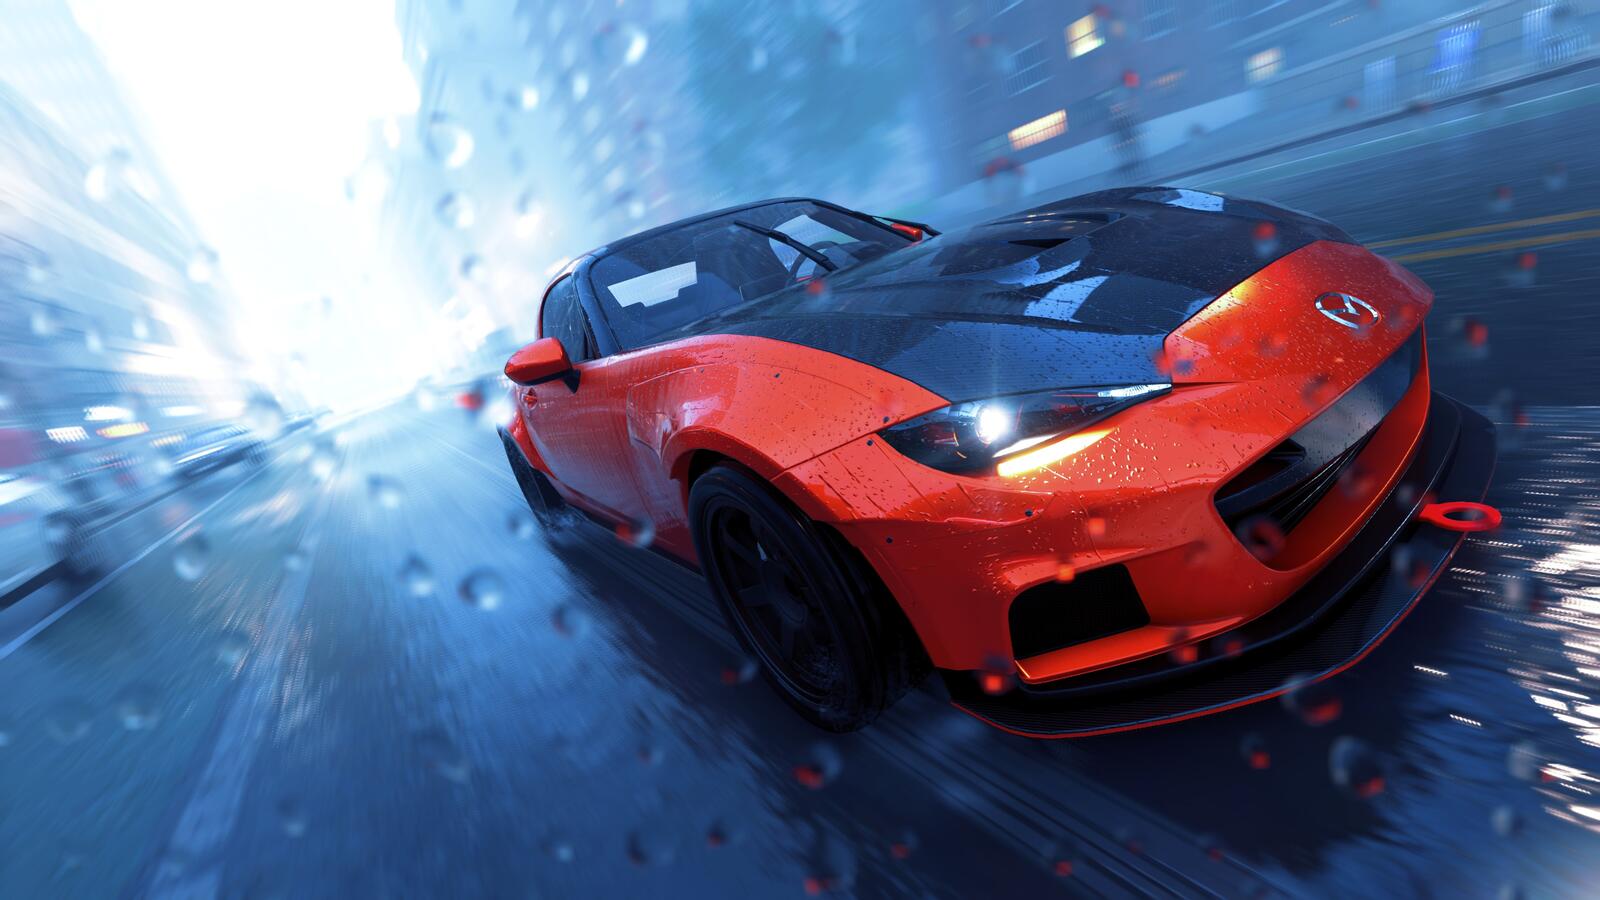 Wallpapers The Crew 2 Xbox games computer games on the desktop